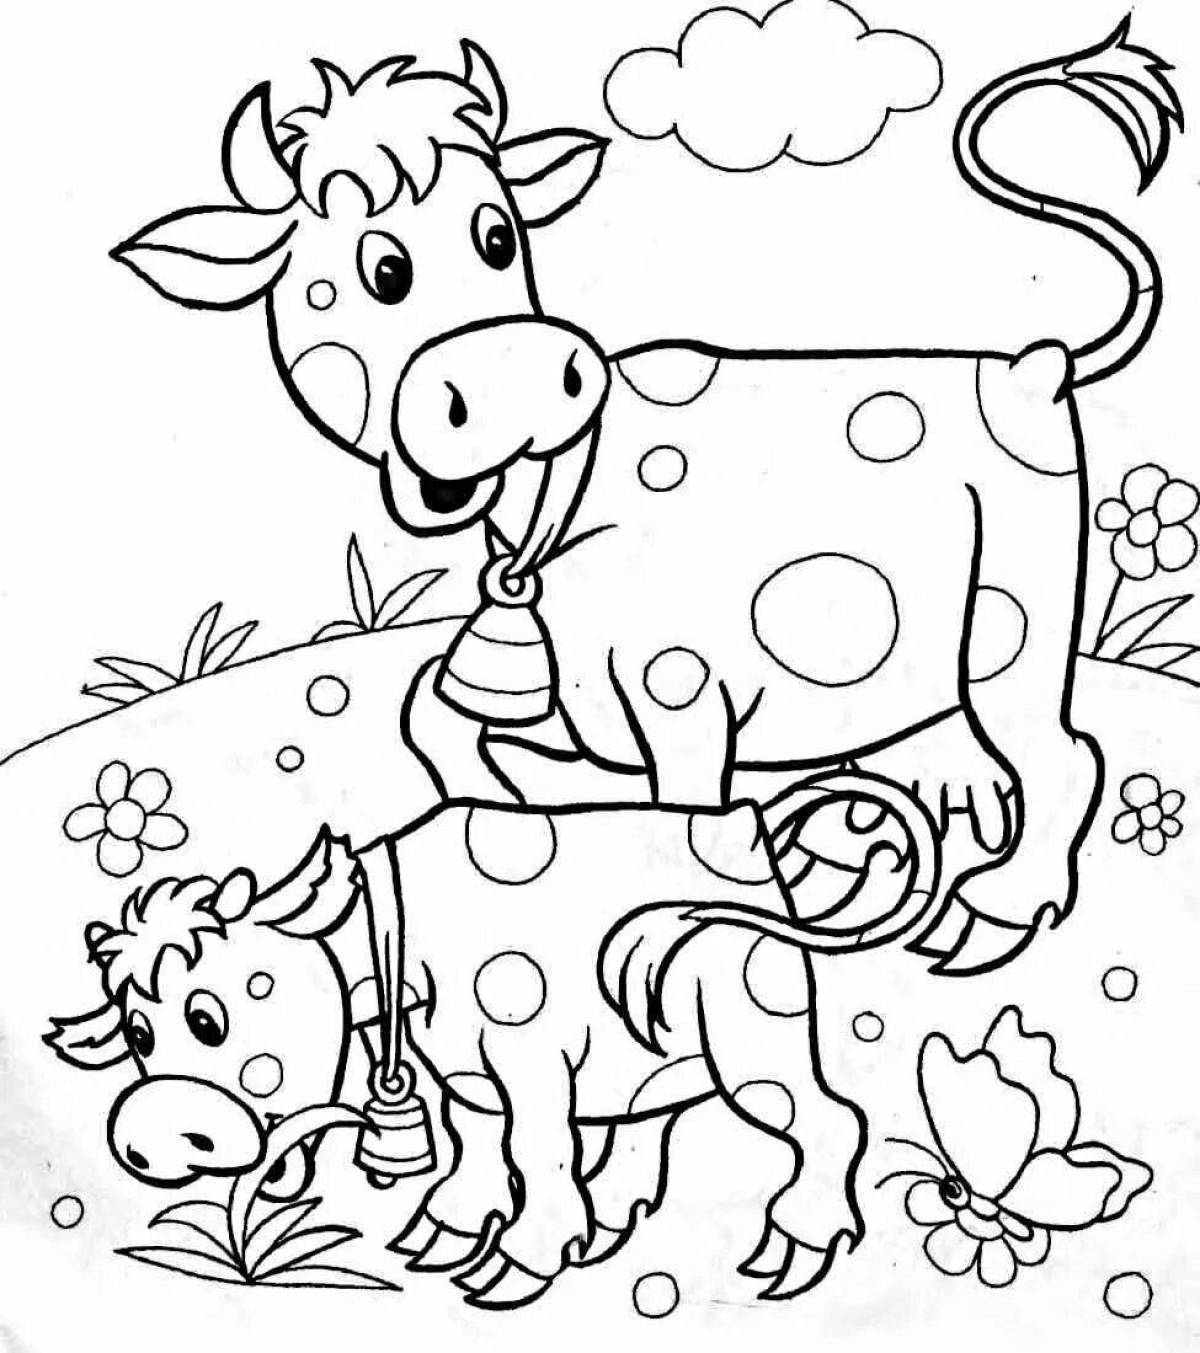 Cow coloring for kids